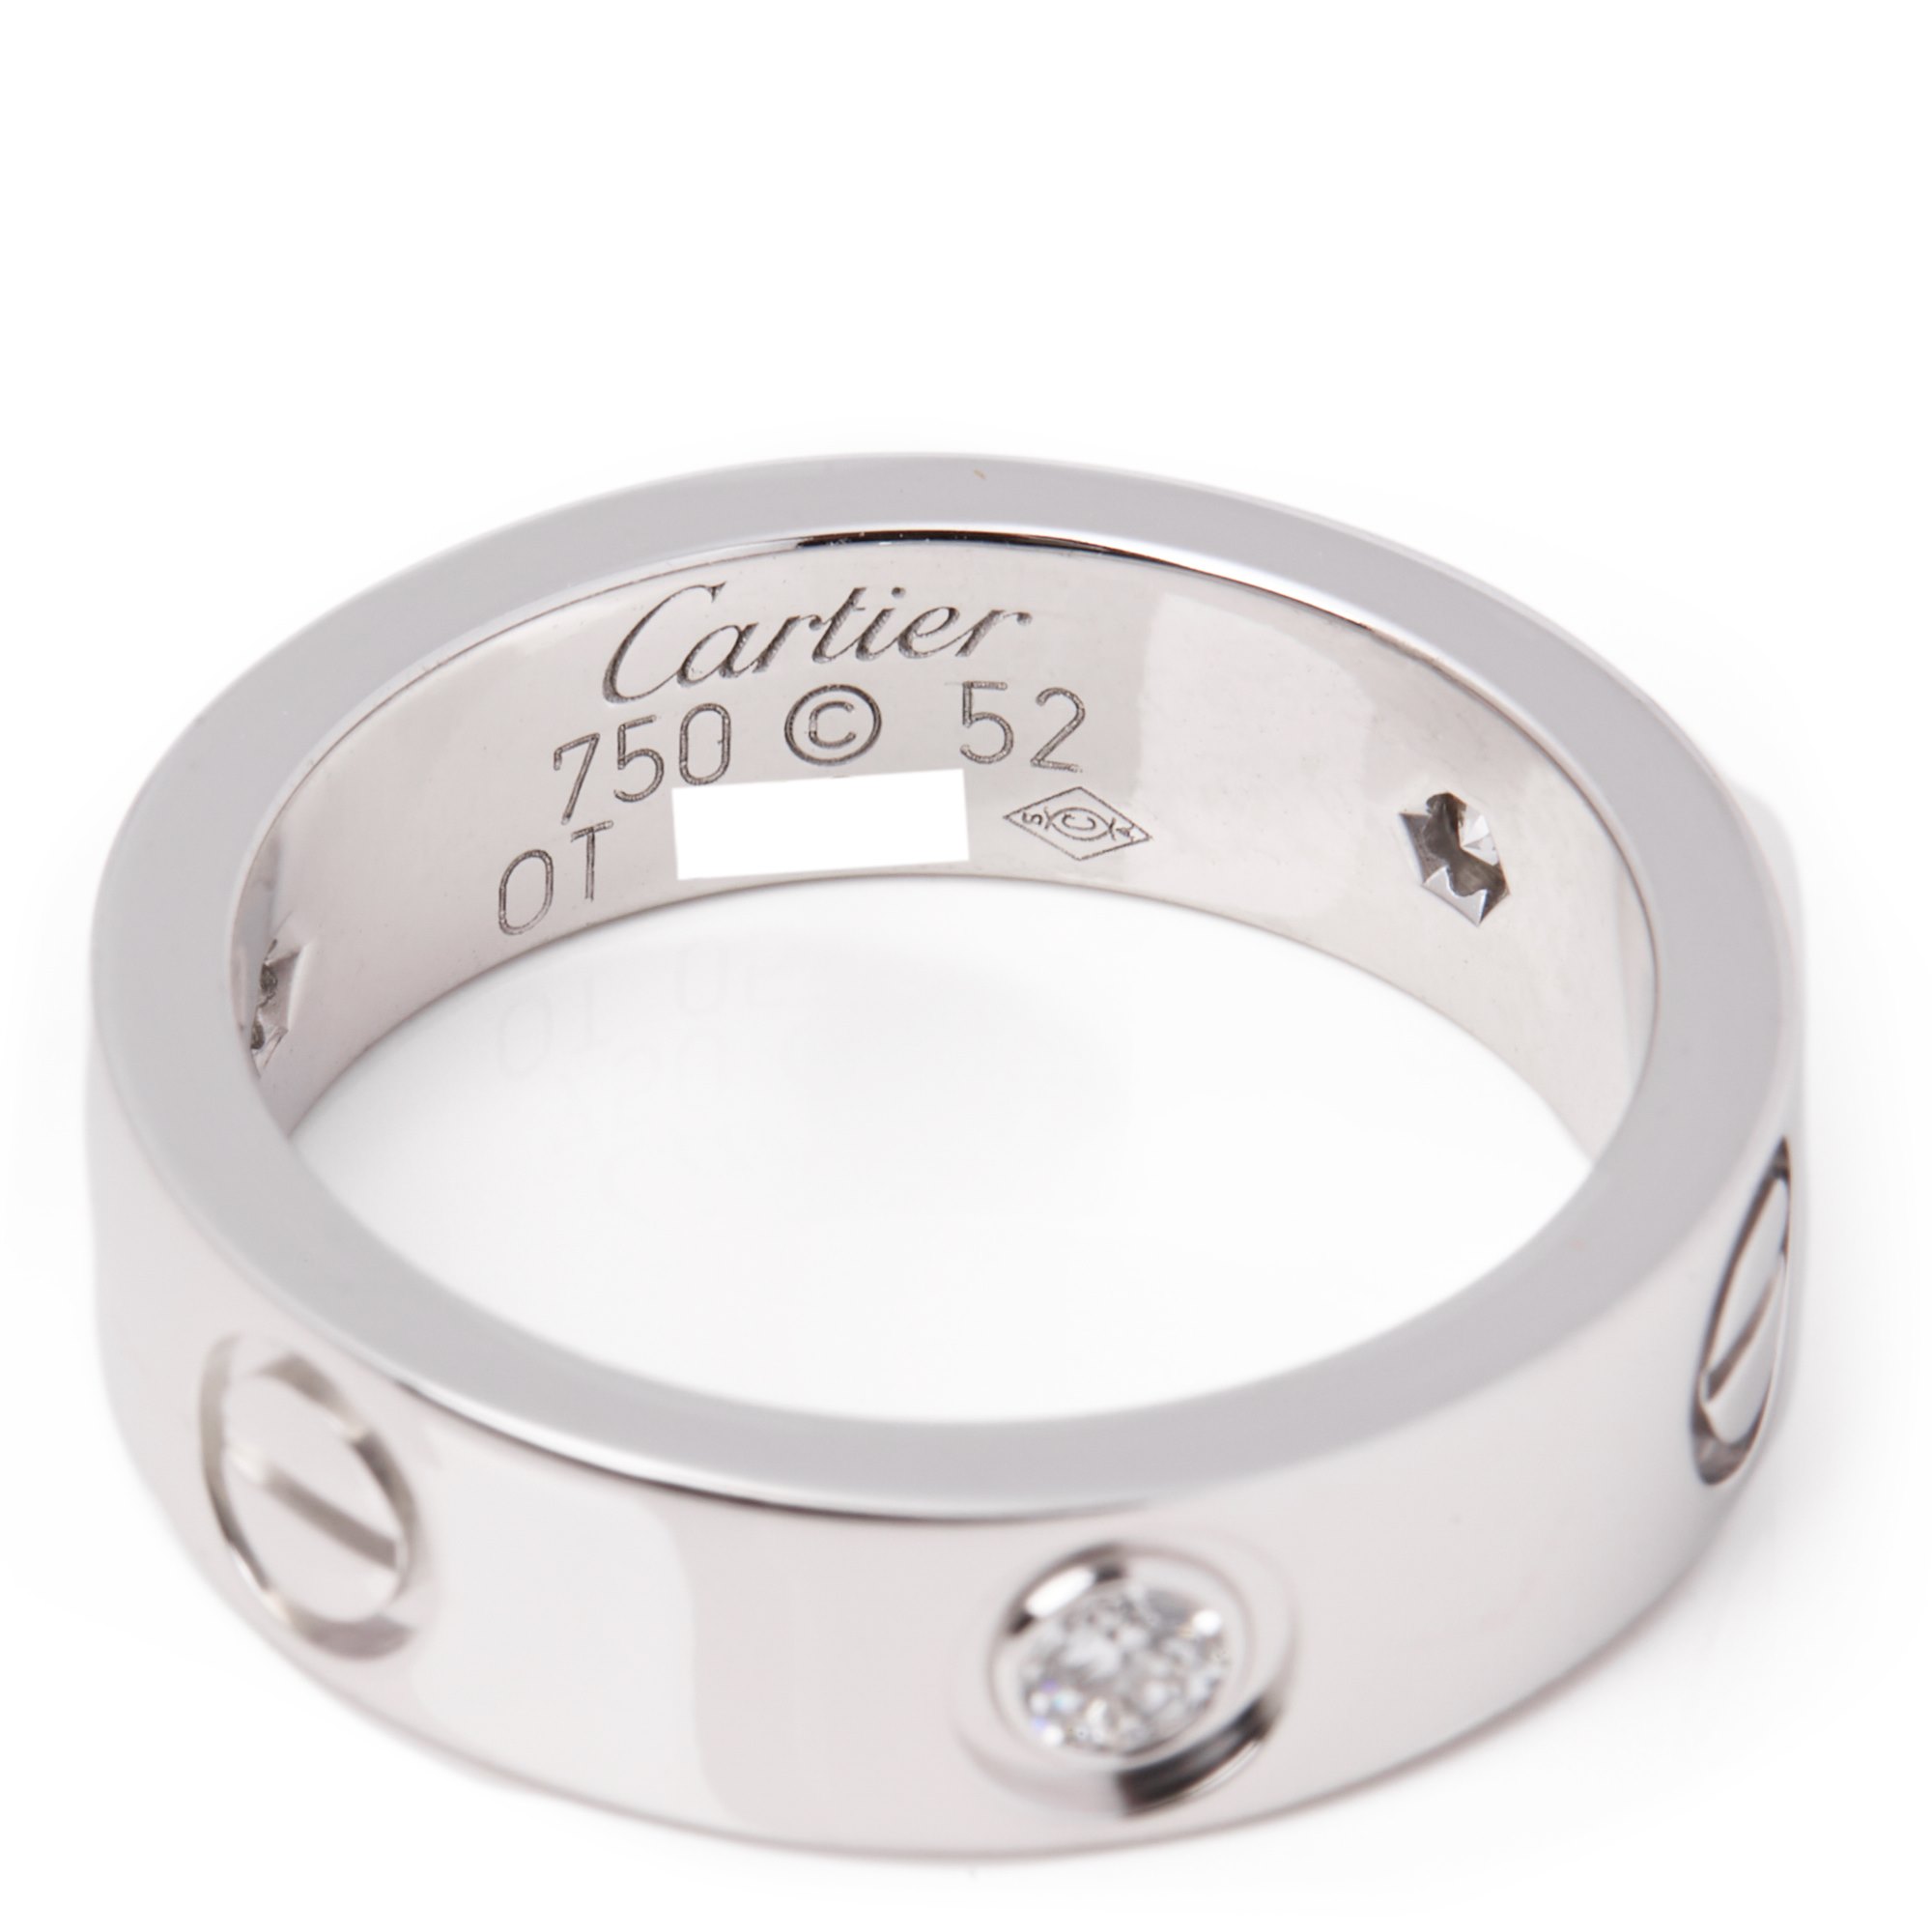 Cartier Love 18ct White Gold 3 Diamond Ring COMJ483 Second Hand Jewellery